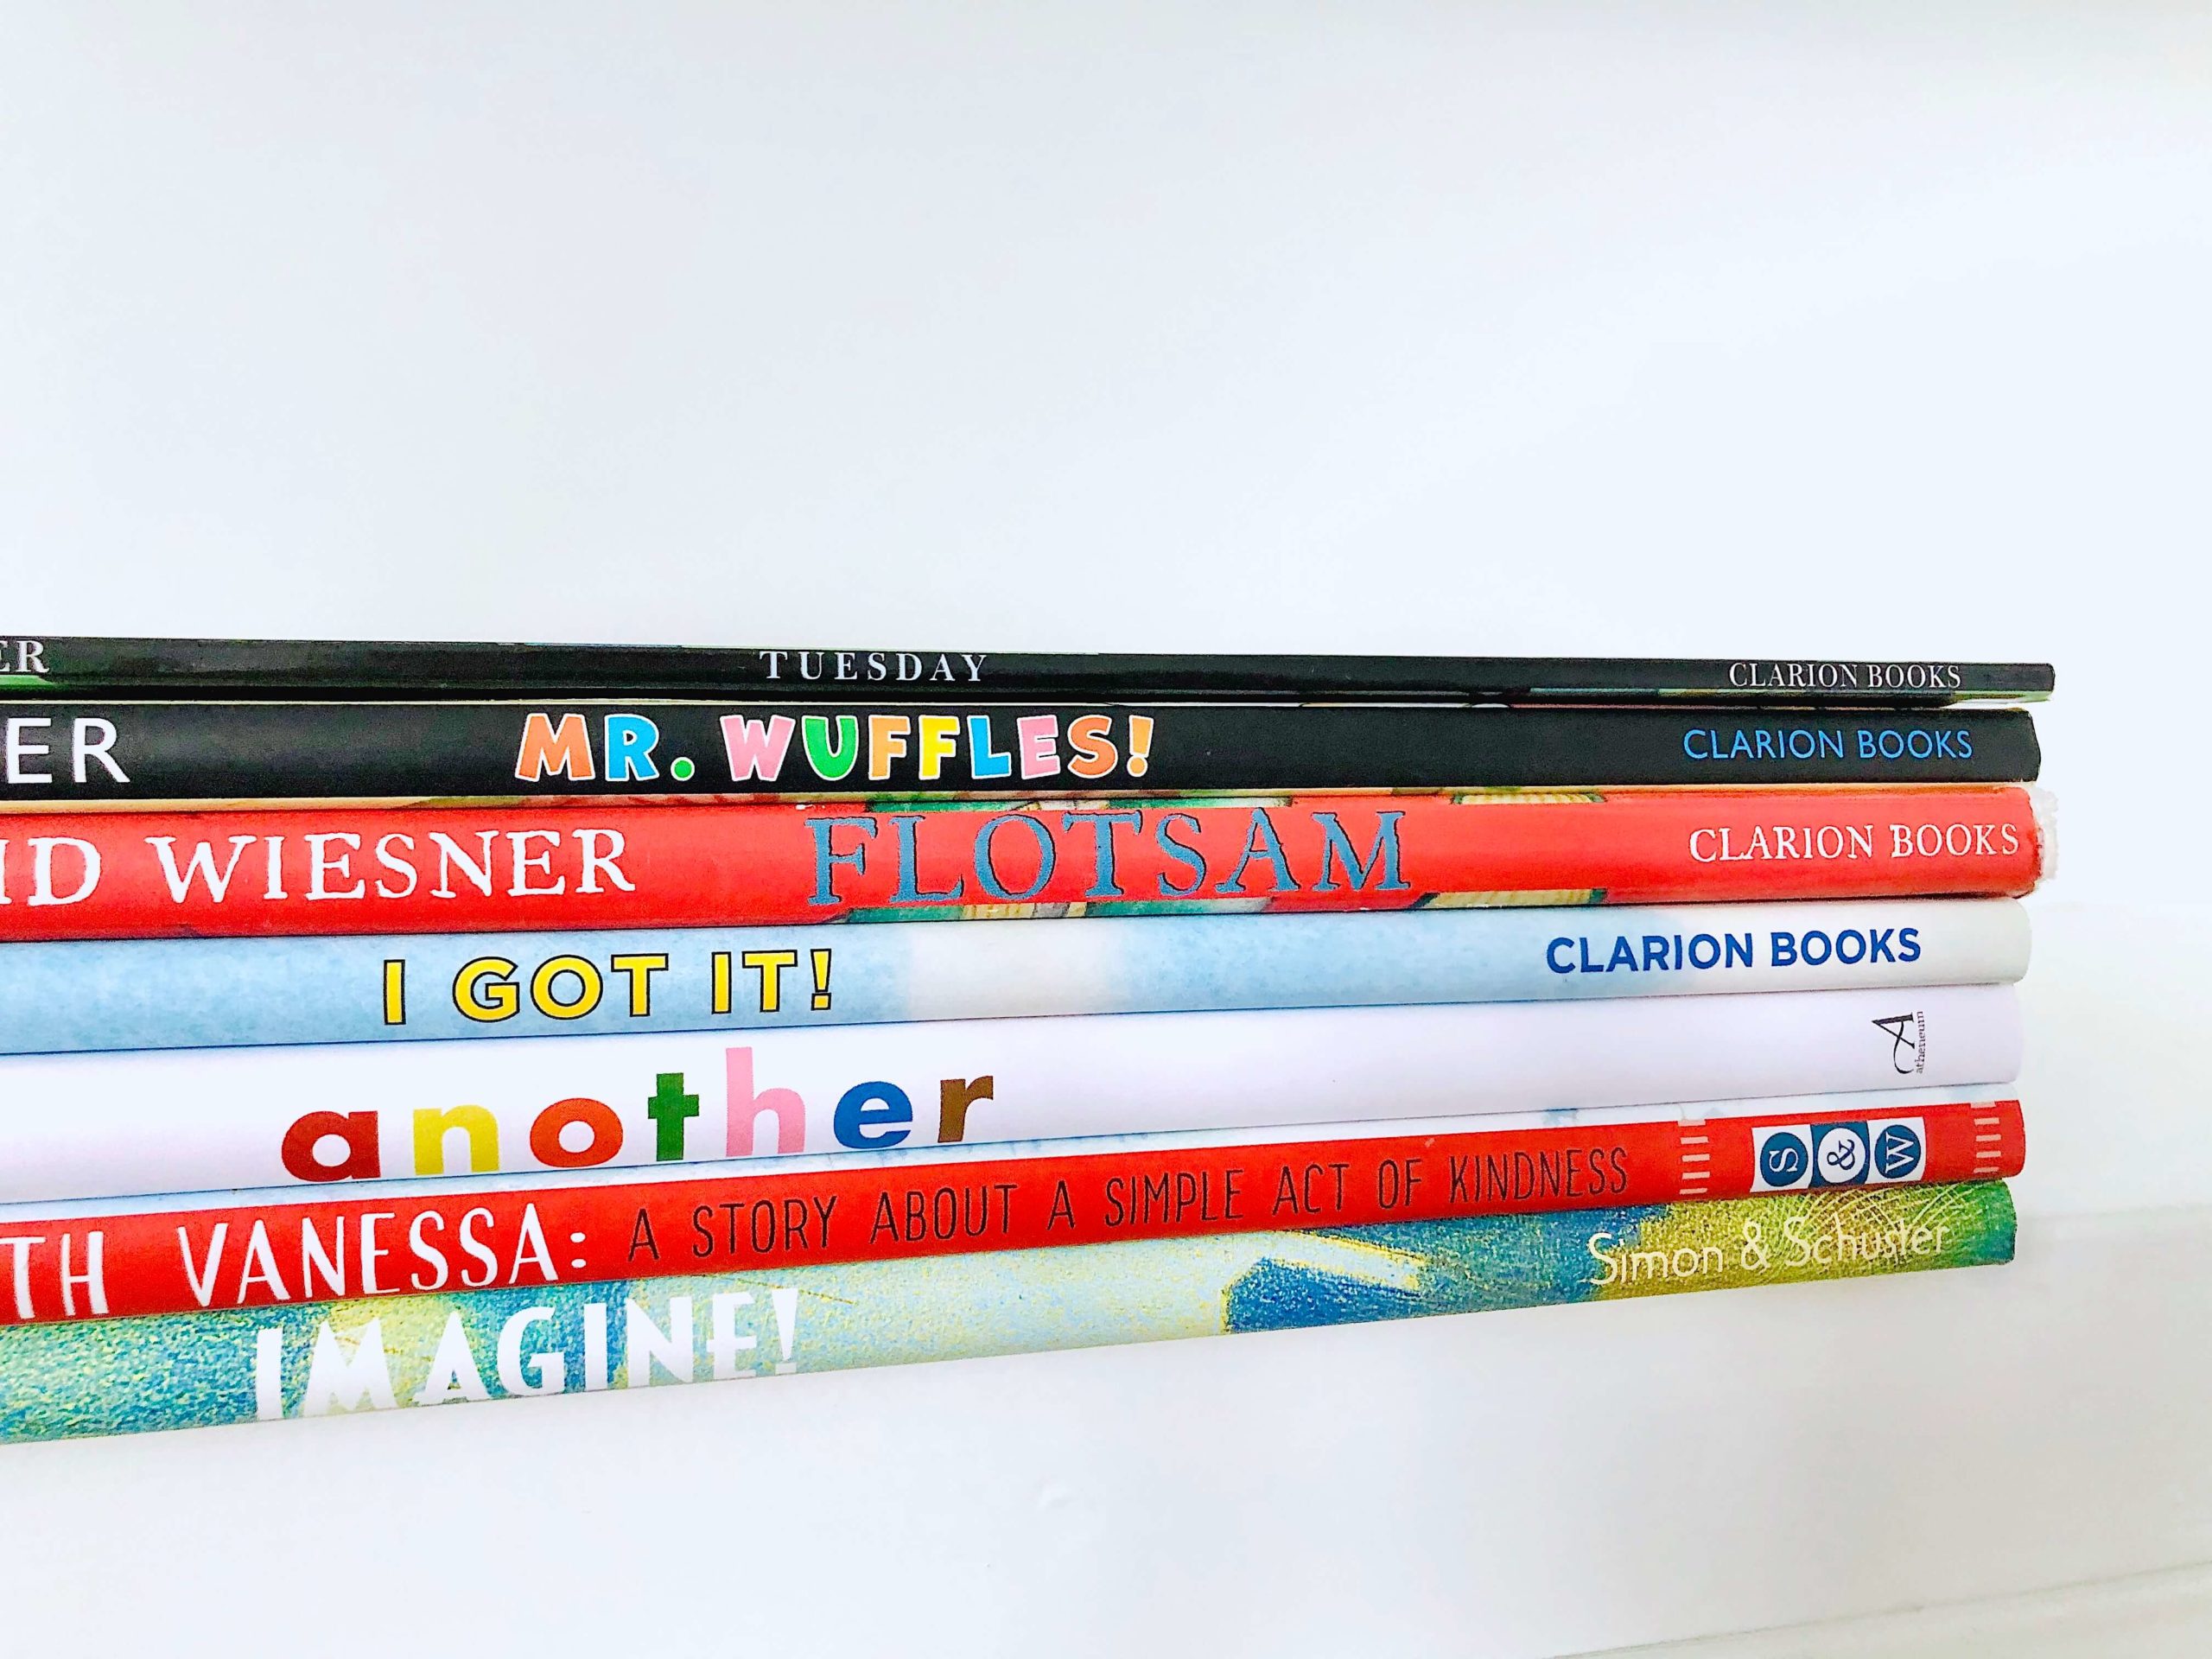 6 Wordless Picture Books for Children